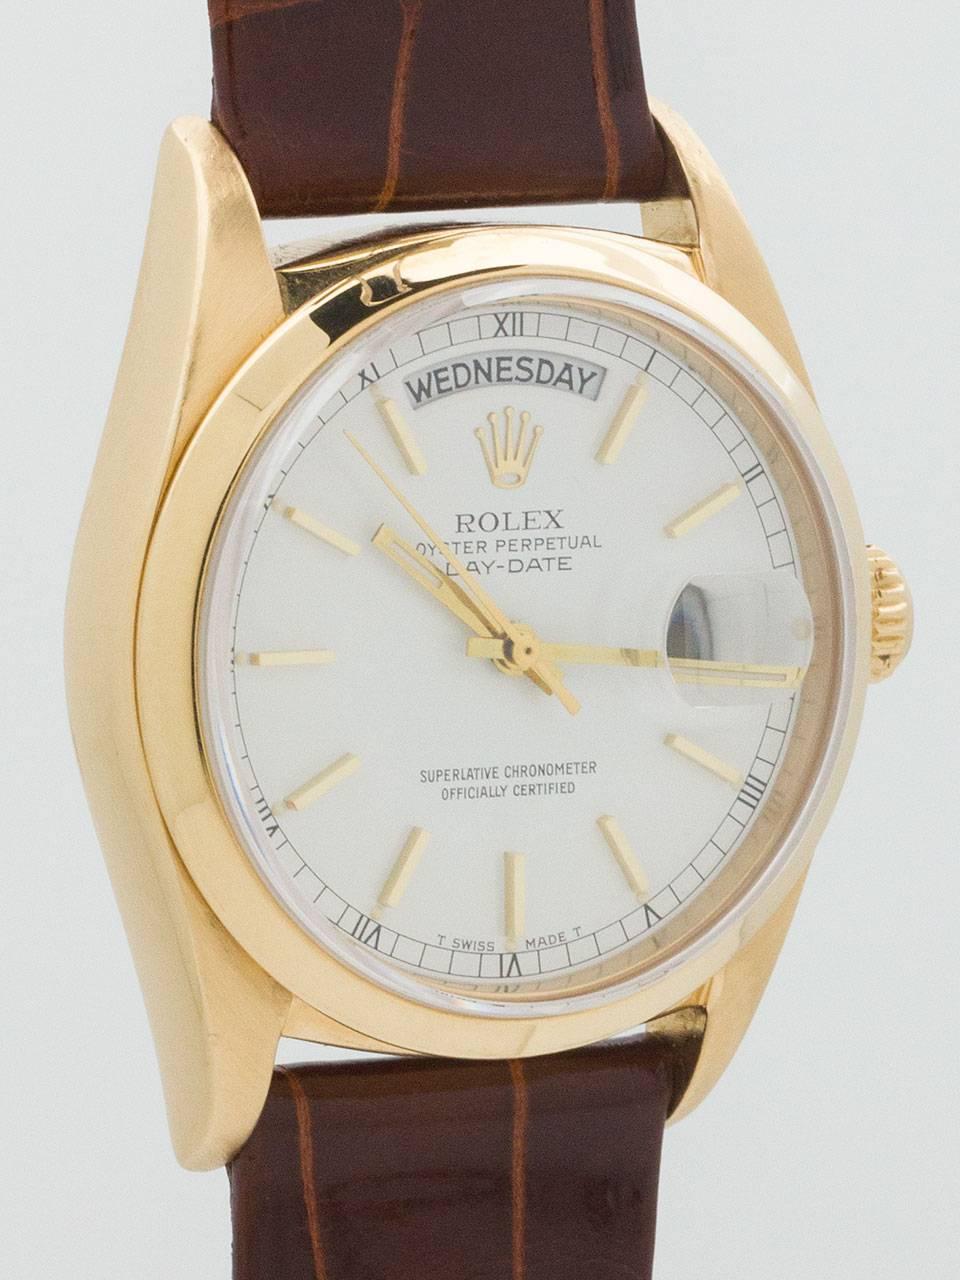 Rolex Yellow Gold Day Date Wristwatch ref 18038 circa 1985. Great looking full size man’s 36mm case with smooth bezel and sapphire crystal. Unusual original white enamel dial with applied gold indexes and gold baton hands. Powered by self winding